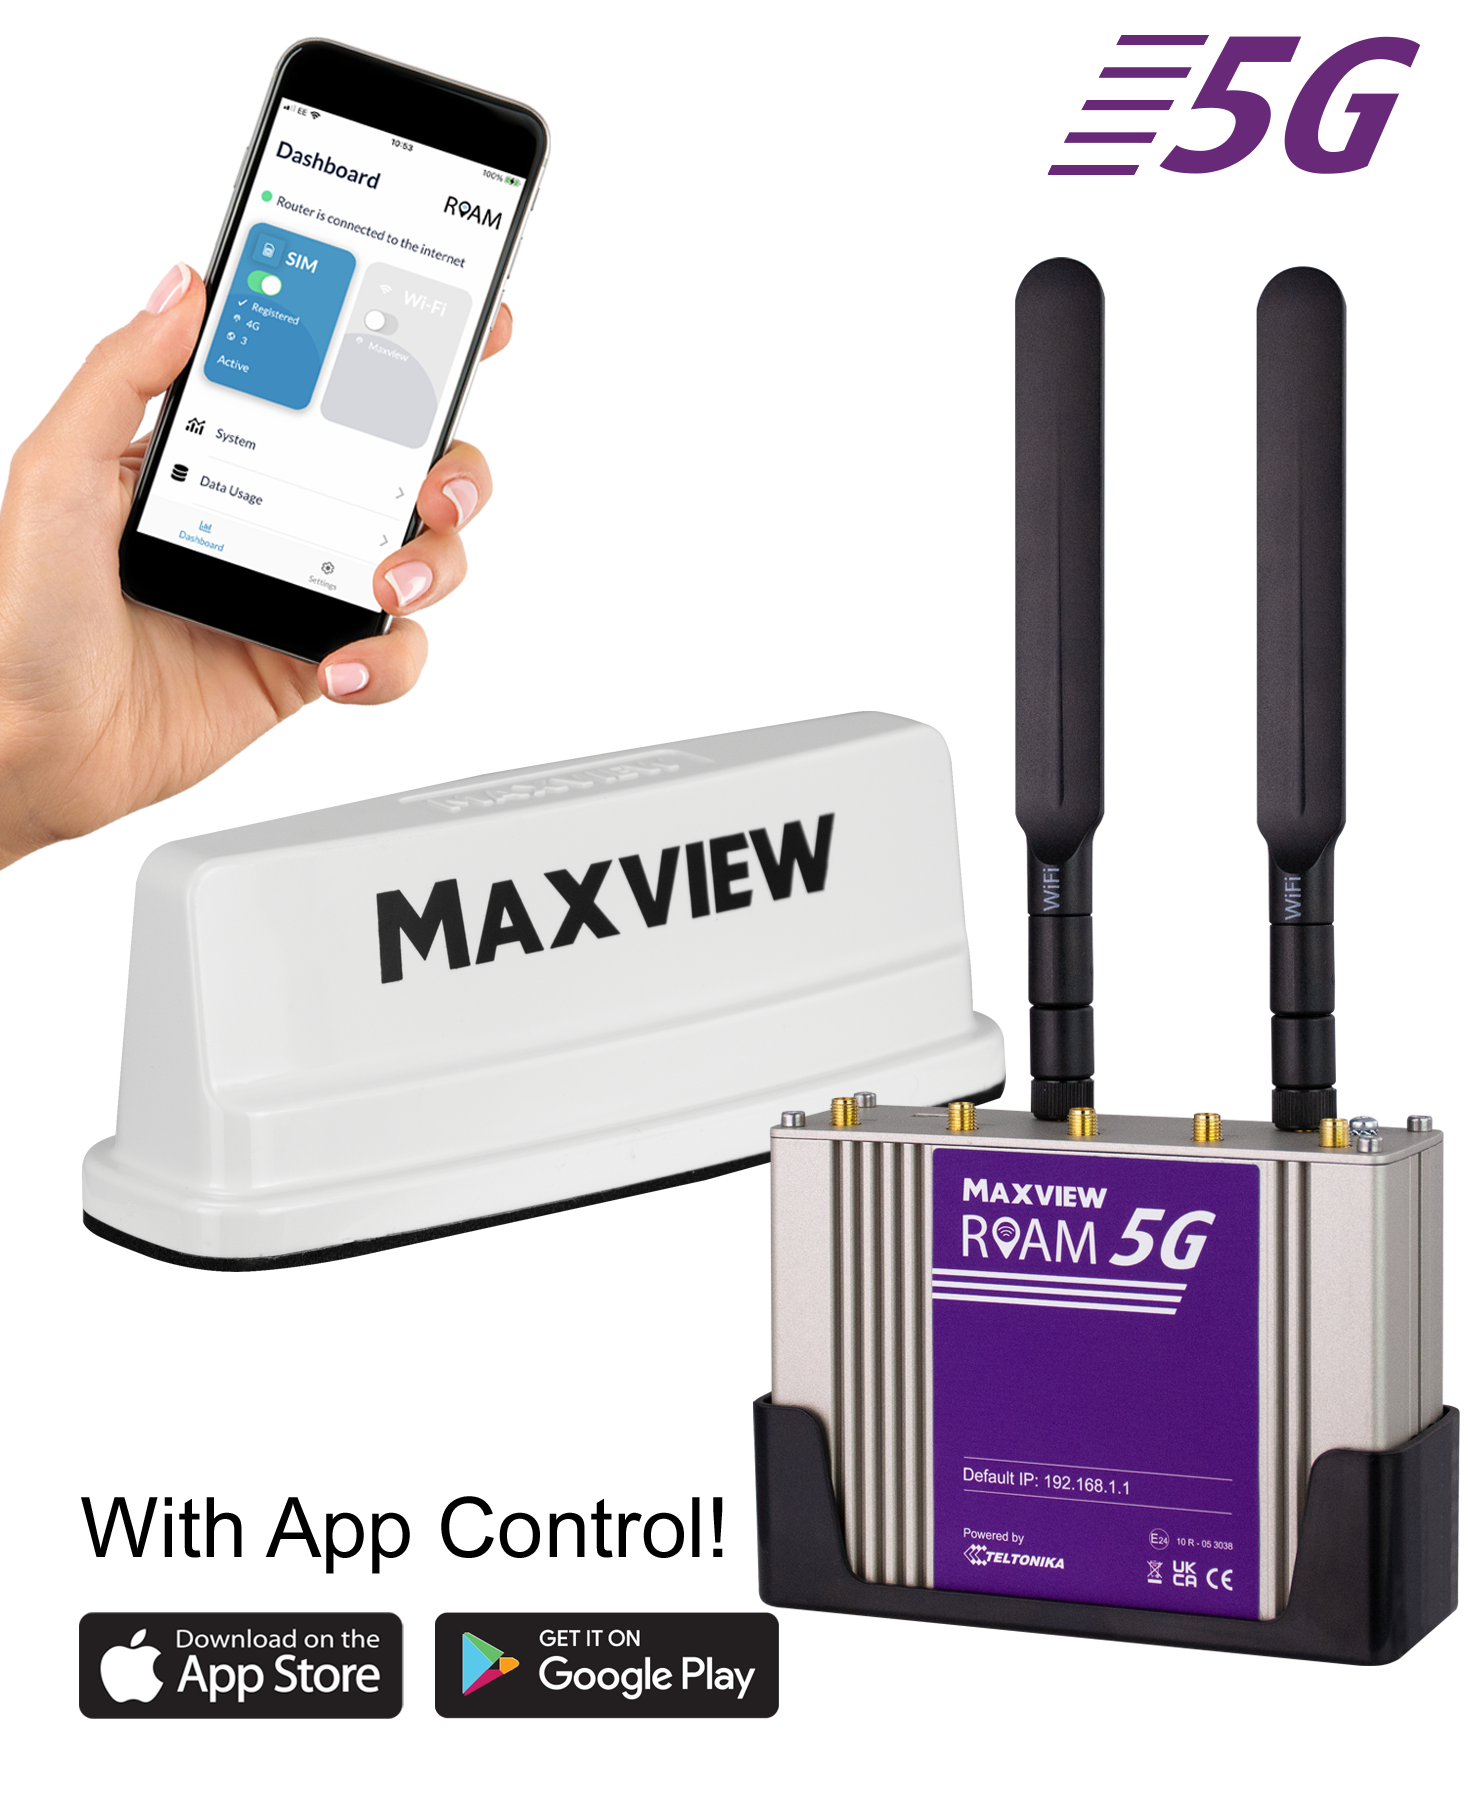 Maxview Roam 5G Campervan Mobile WIFI System